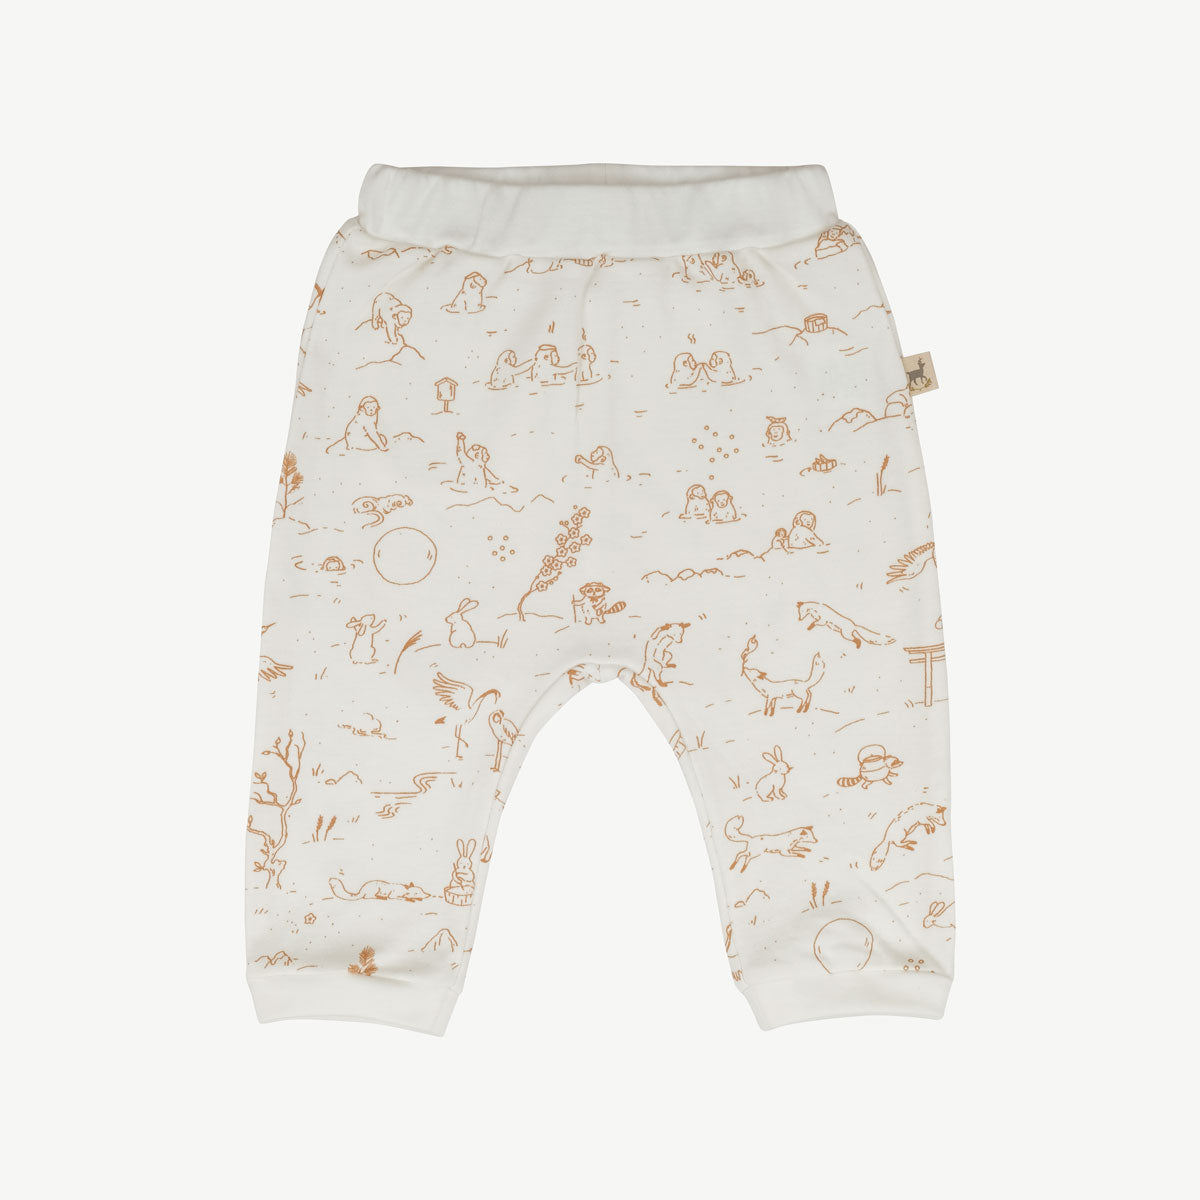 'the story' ivory pants